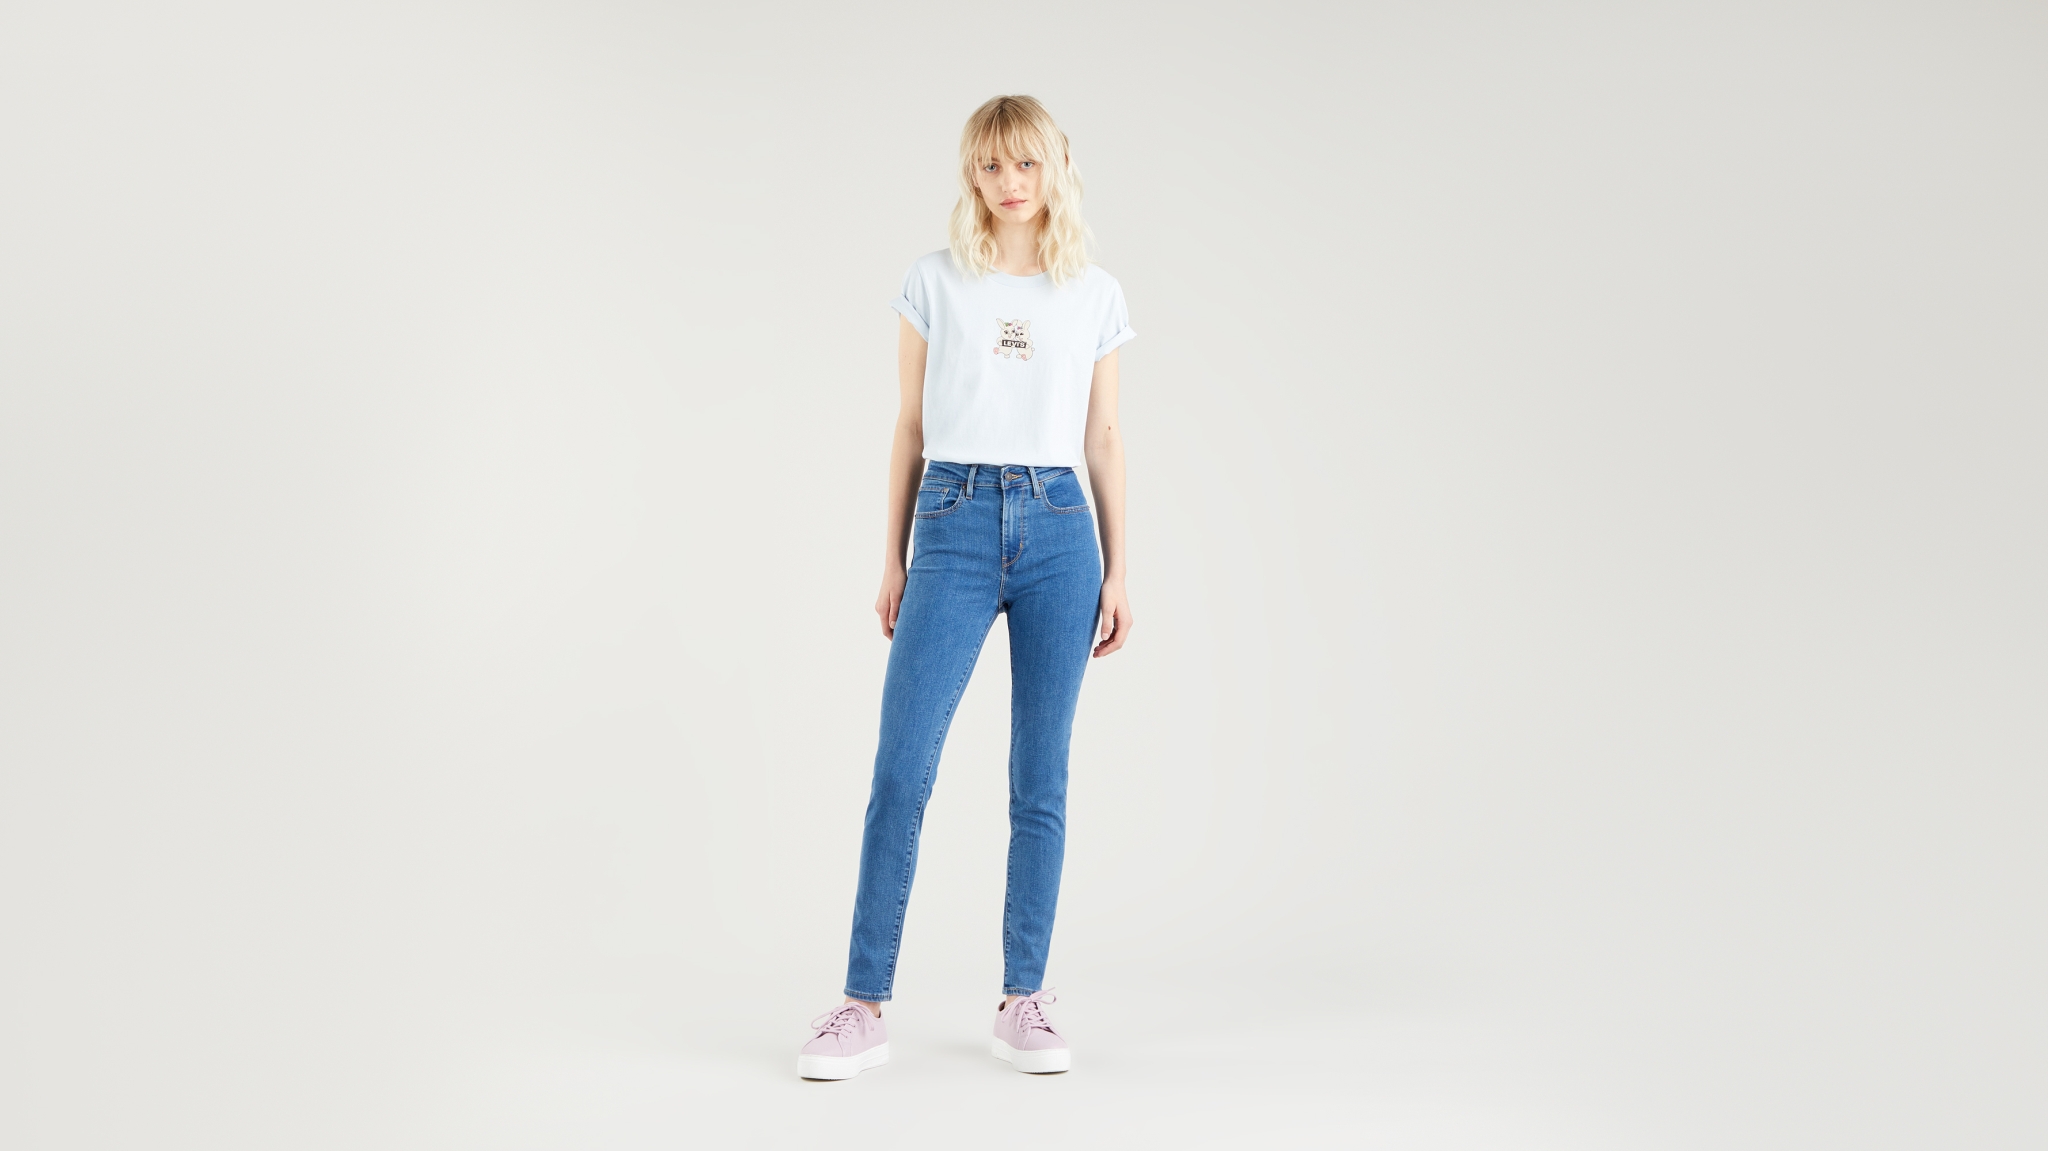 LEVI'S 721 High Rise Skinny Jeans 10623551